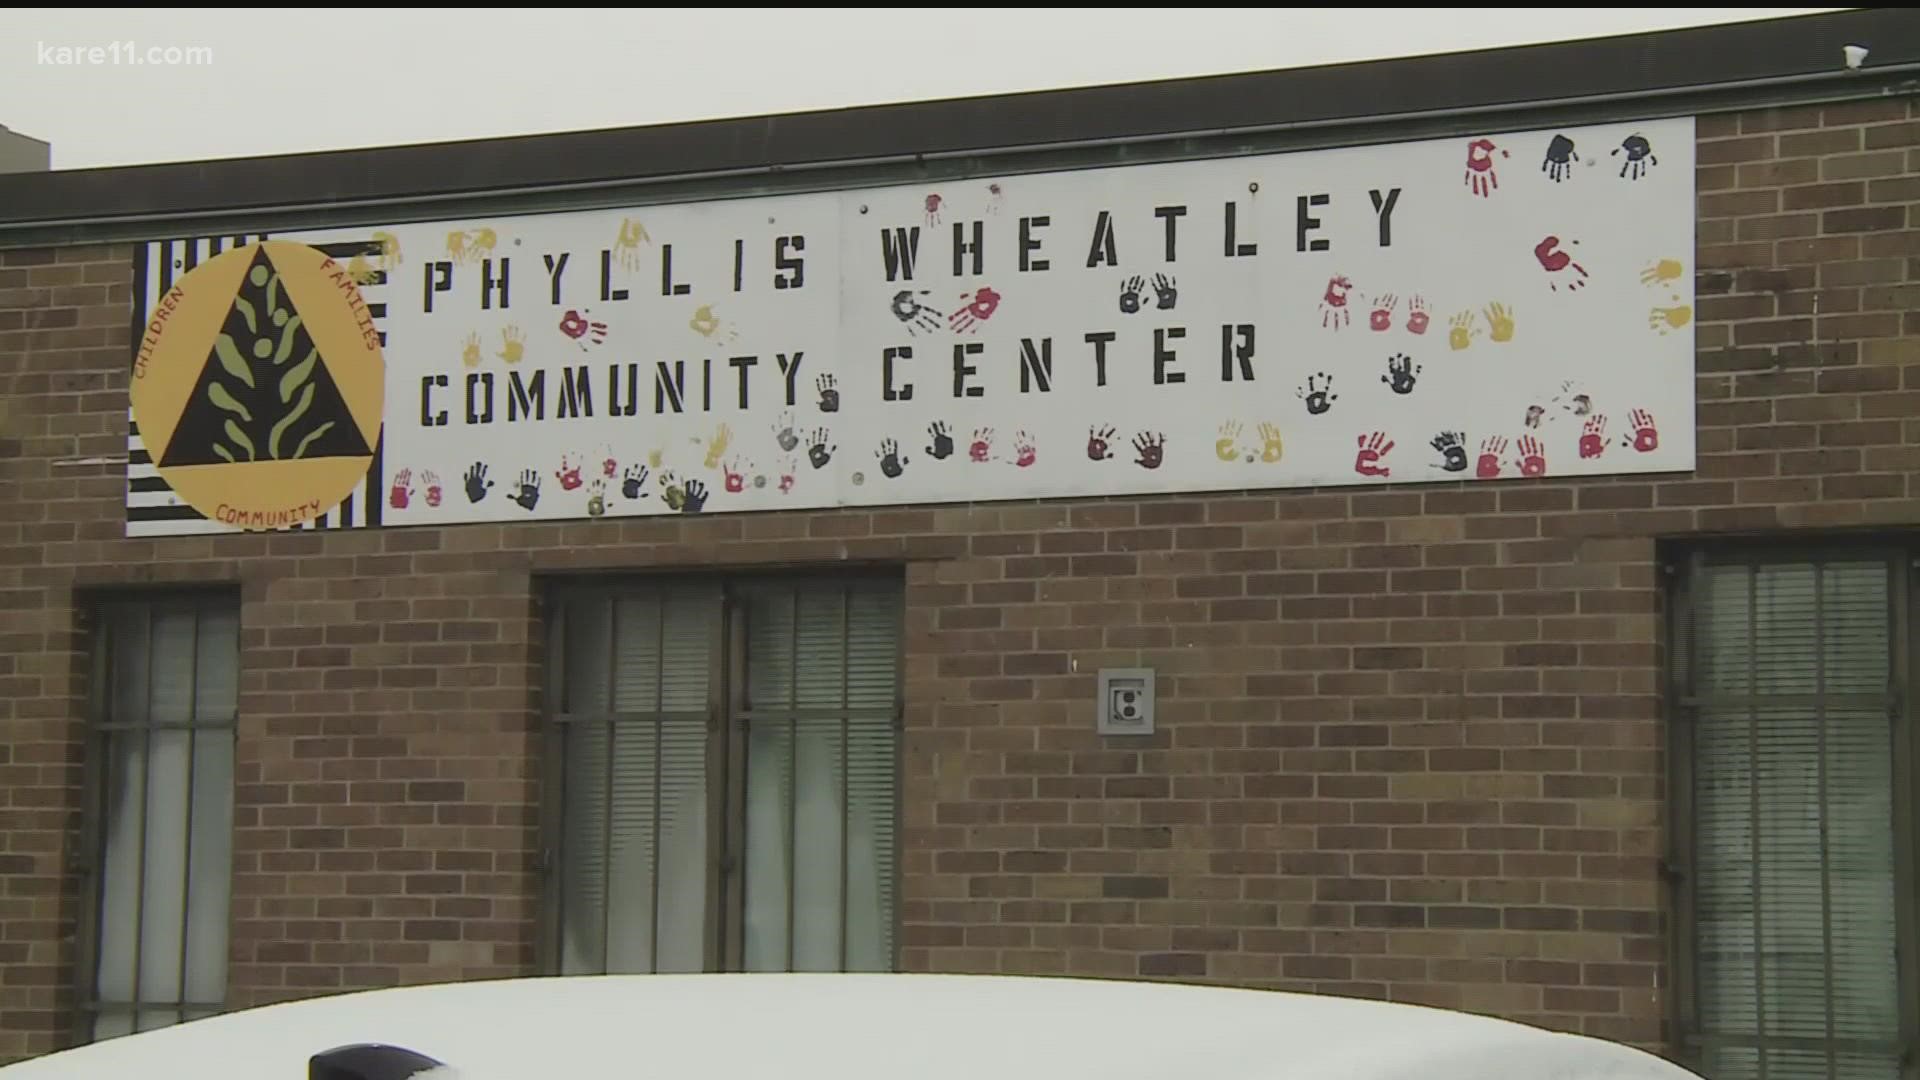 Communities of color often lack educational resources when it comes to tech, but the Phyllis Wheatley Community Center wants to change that.